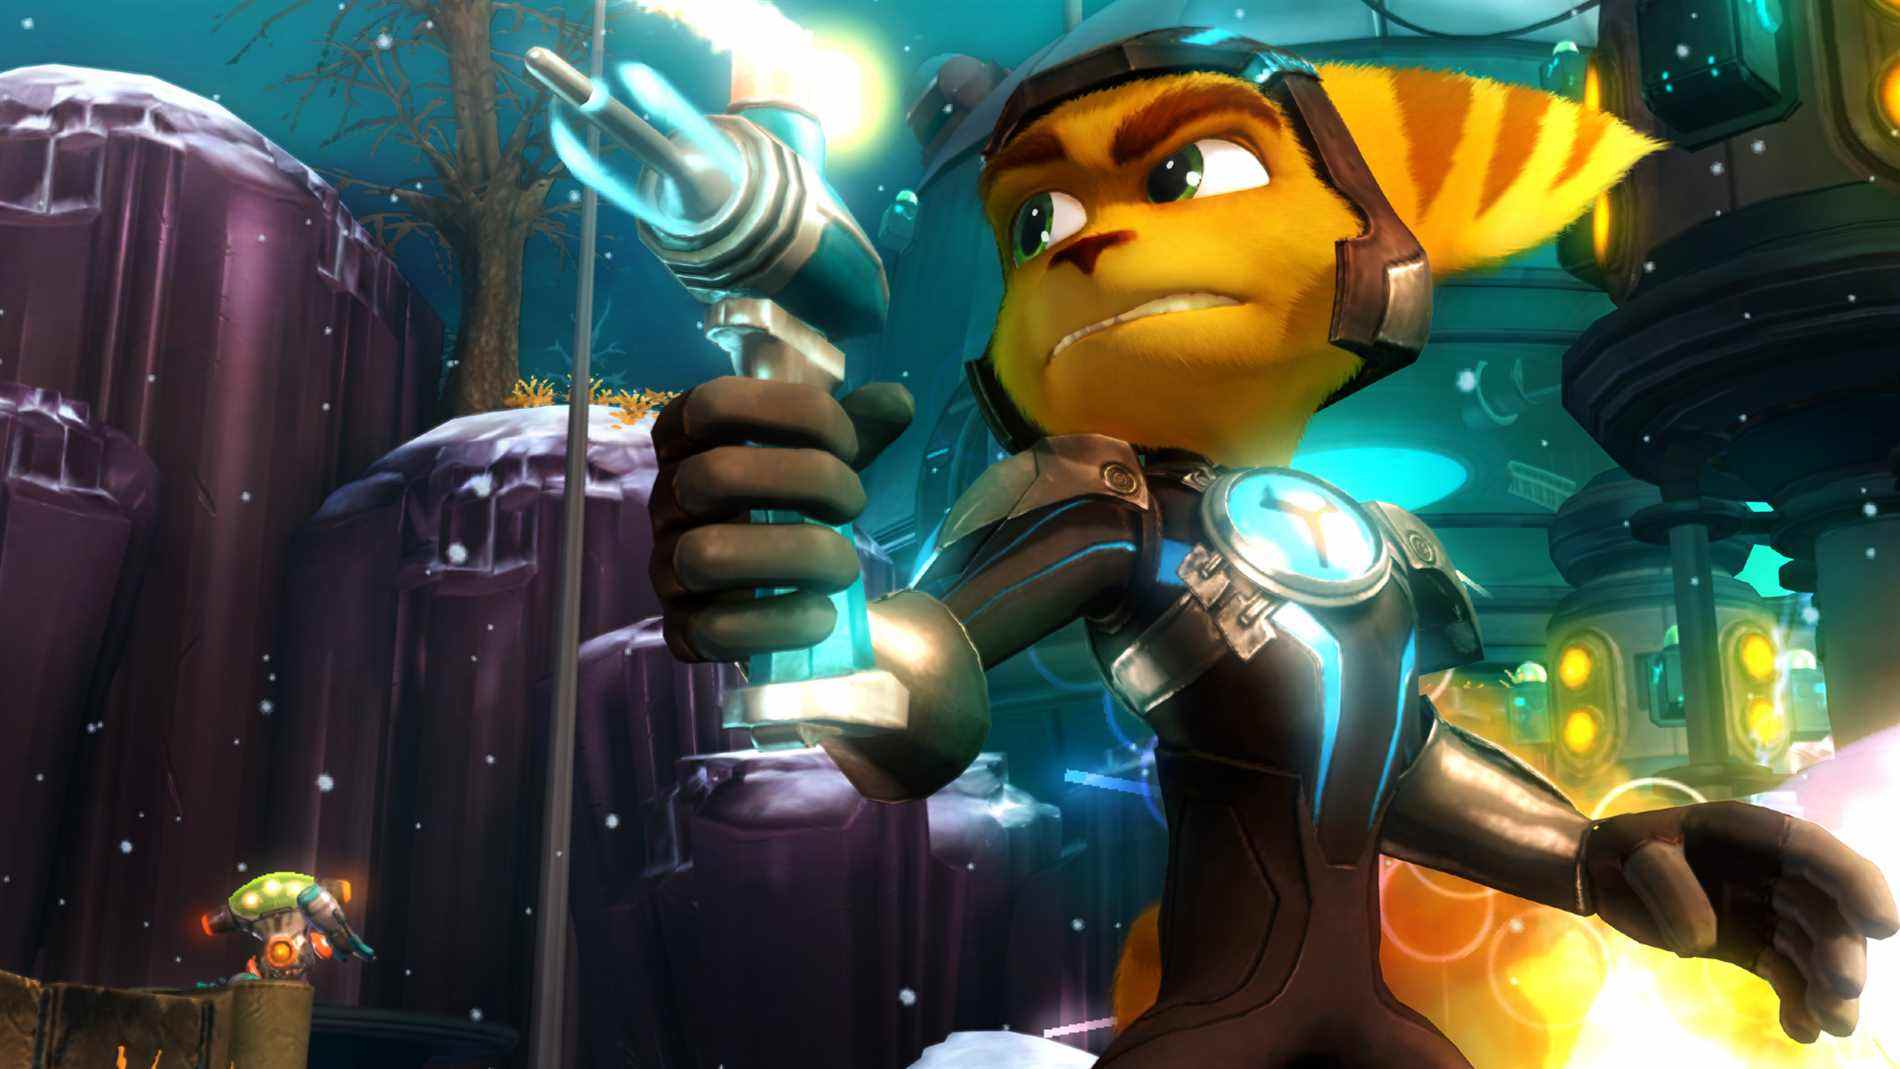 Meilleurs jeux Ratchet and Clank - Ratchet and Clank: A Crack In Time